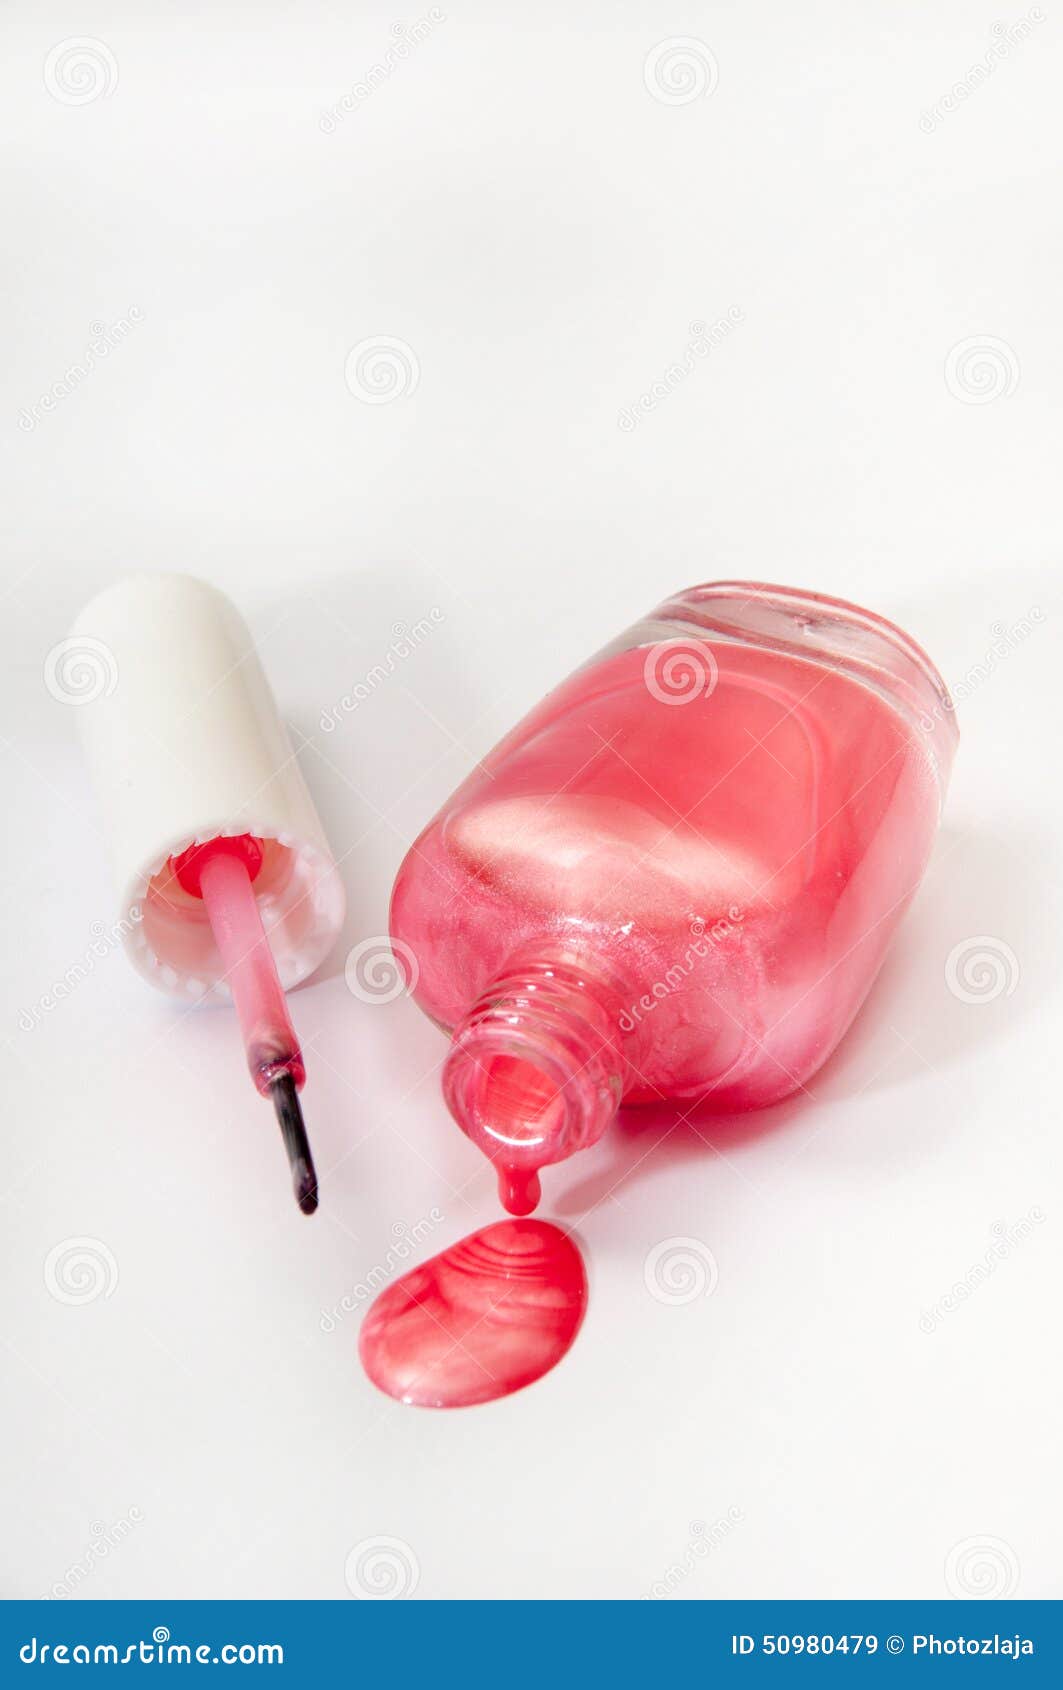 Spilled pink nail polish stock image. Image of care, accessory - 50980479